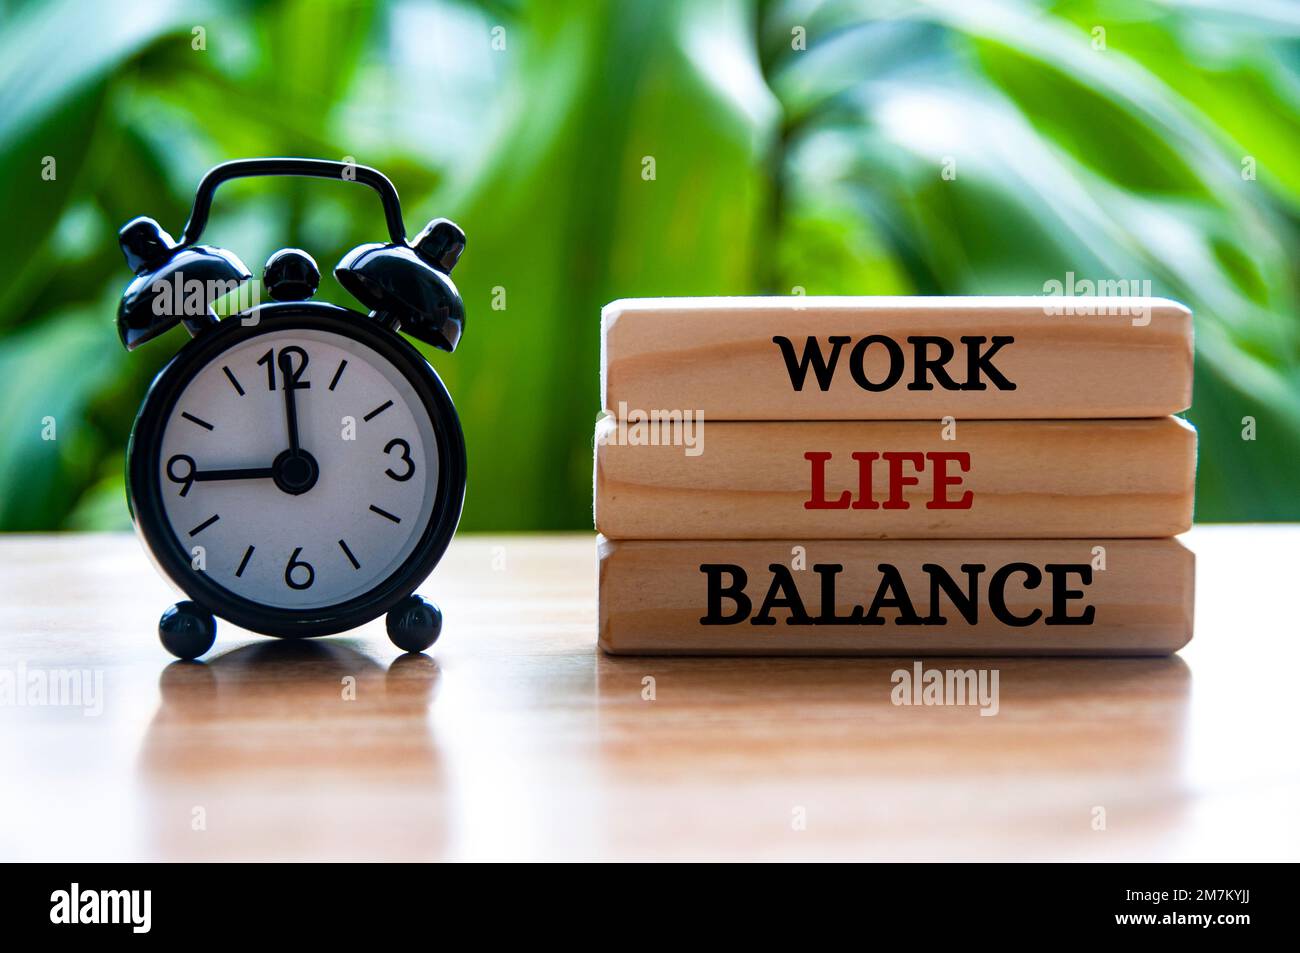 Alarm clock pointing at 9am with work life balance text on wooden blocks. Stock Photo